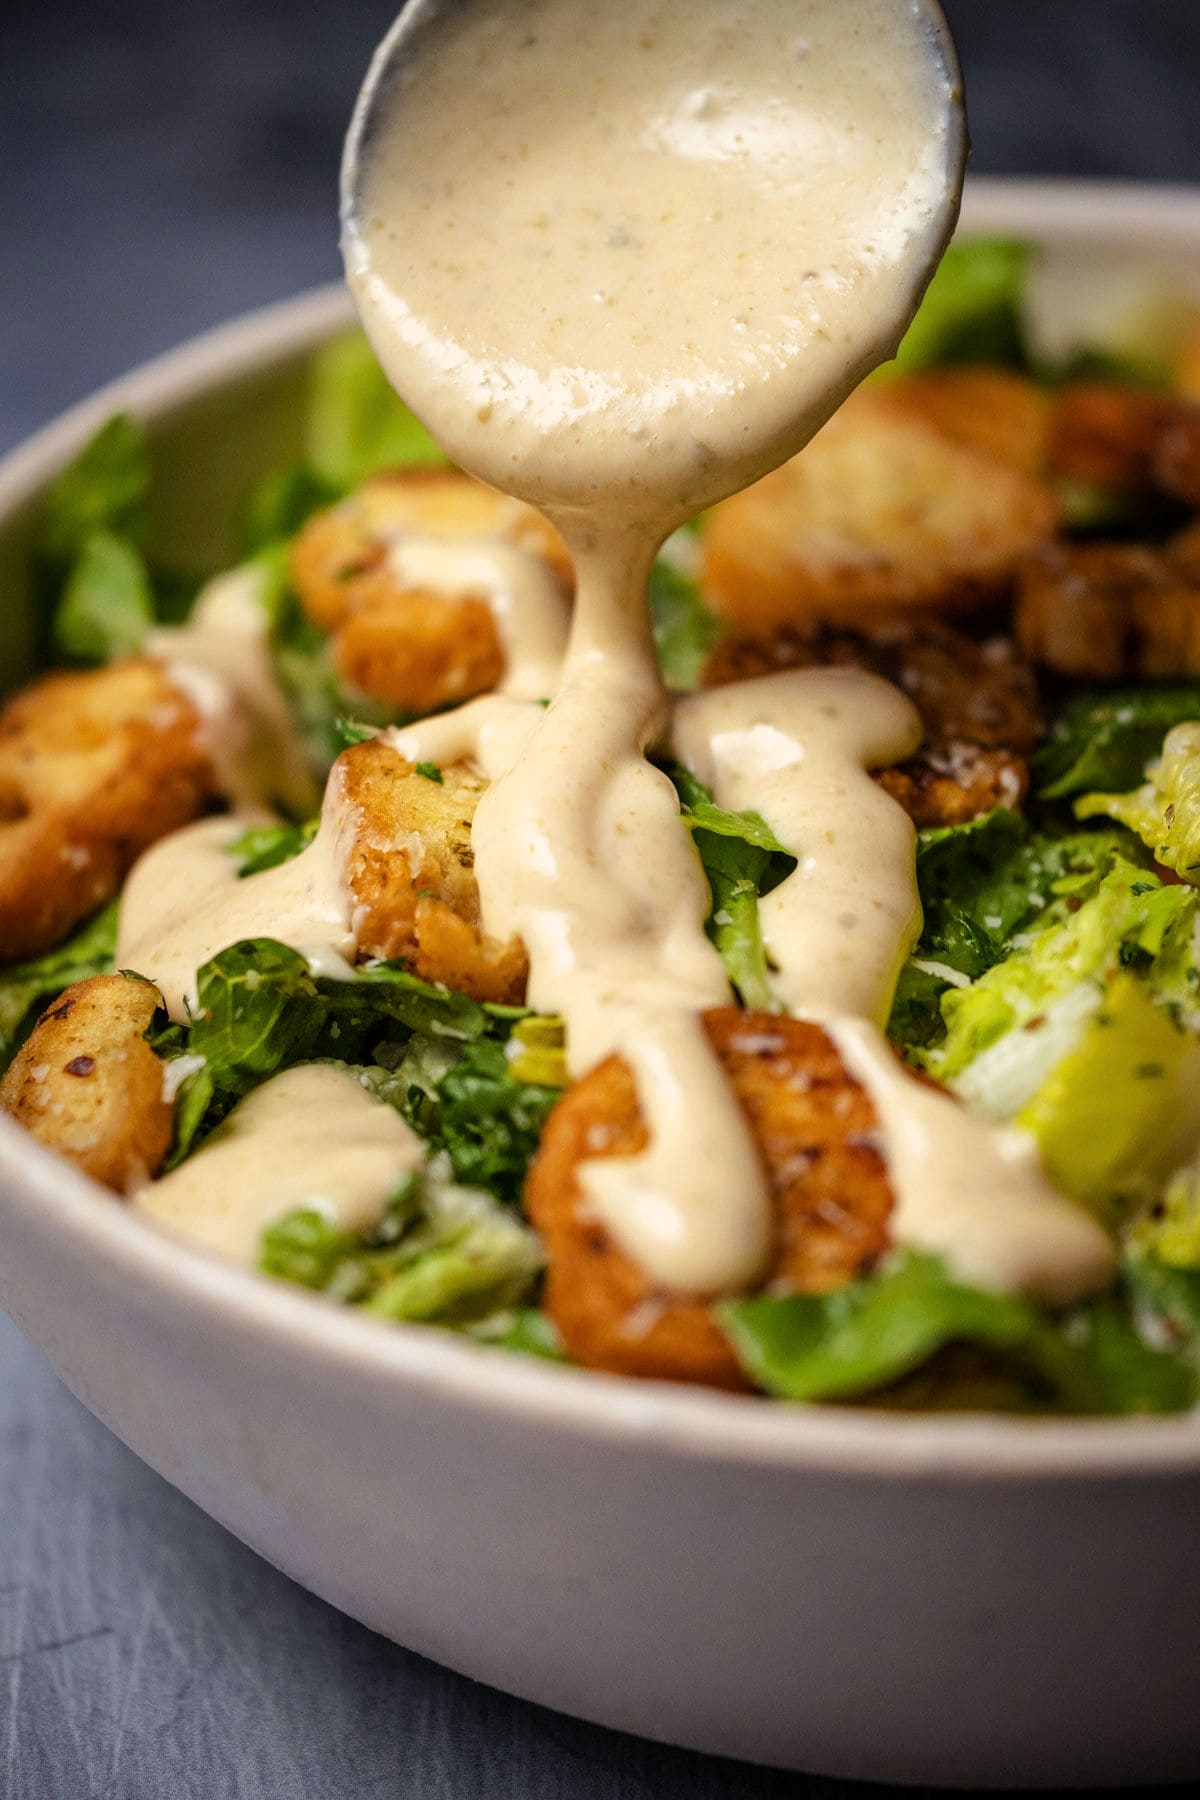 Vegetarian caesar dressing drizzling off a spoon over a caesar salad.